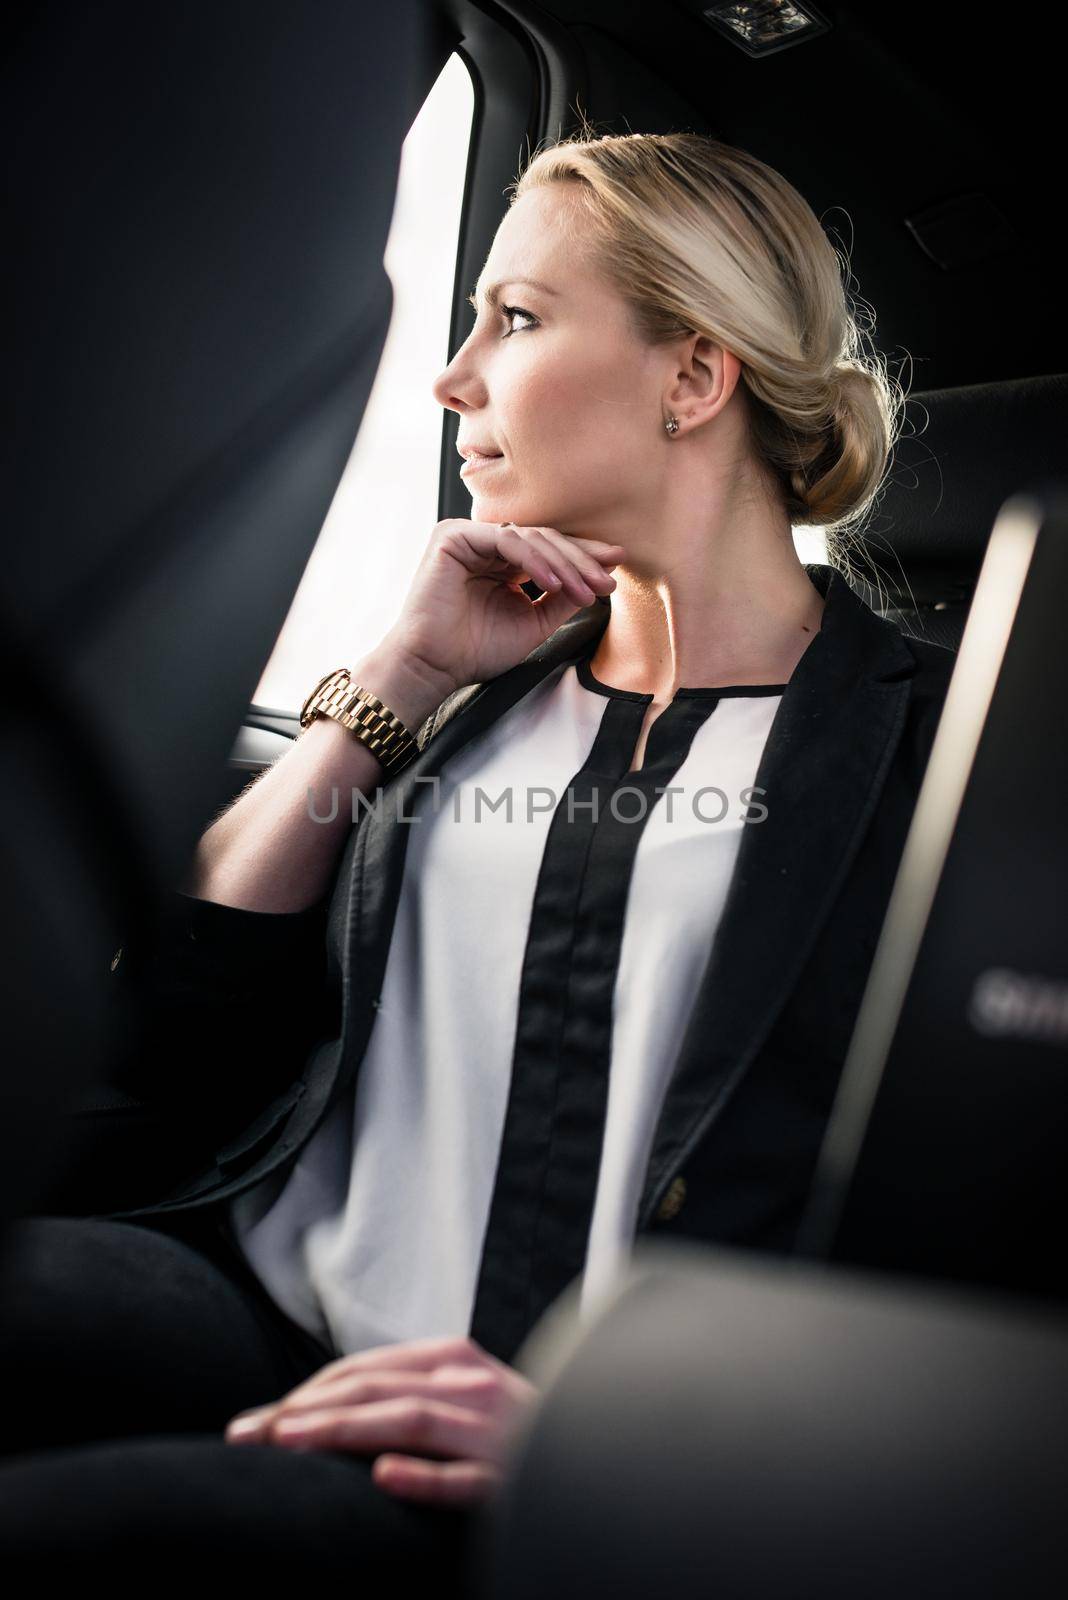 Portrait of stylish young businesswoman sitting in car